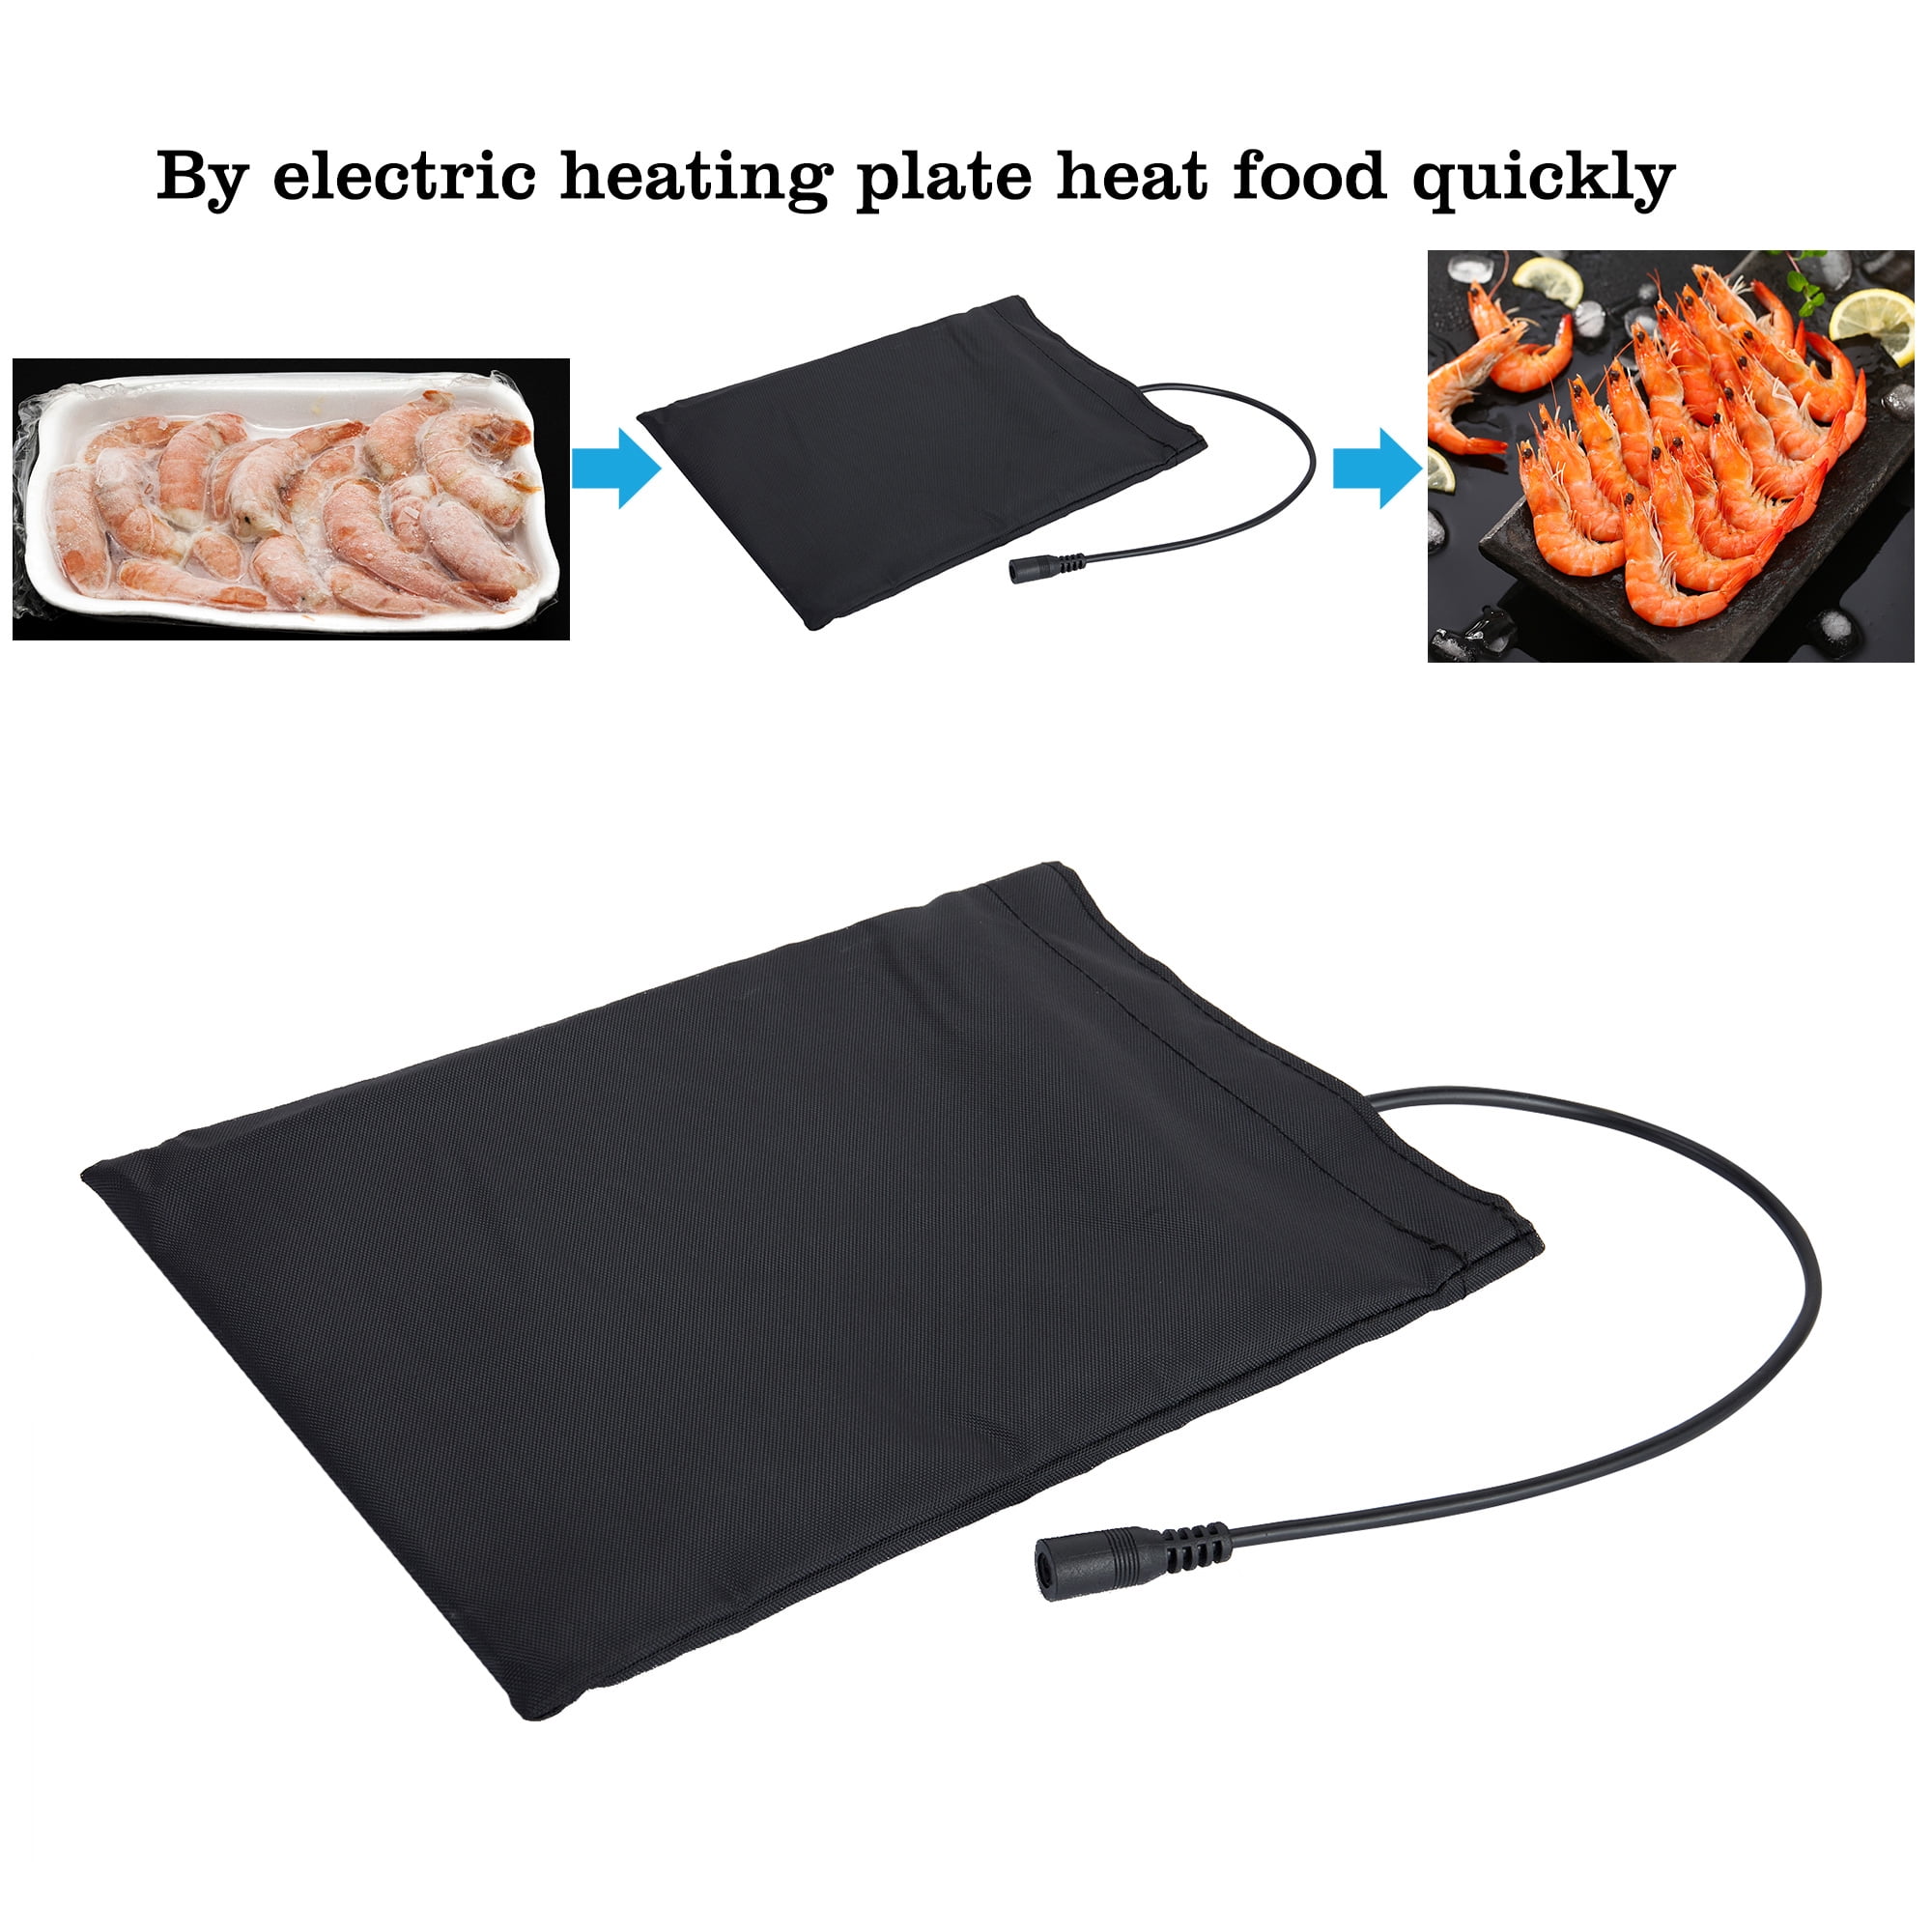 Dosevita Portable Oven Car Food Warmer 12V,24V,110V Mini Personal Microwave  Heated Lunch Box for Reh…See more Dosevita Portable Oven Car Food Warmer